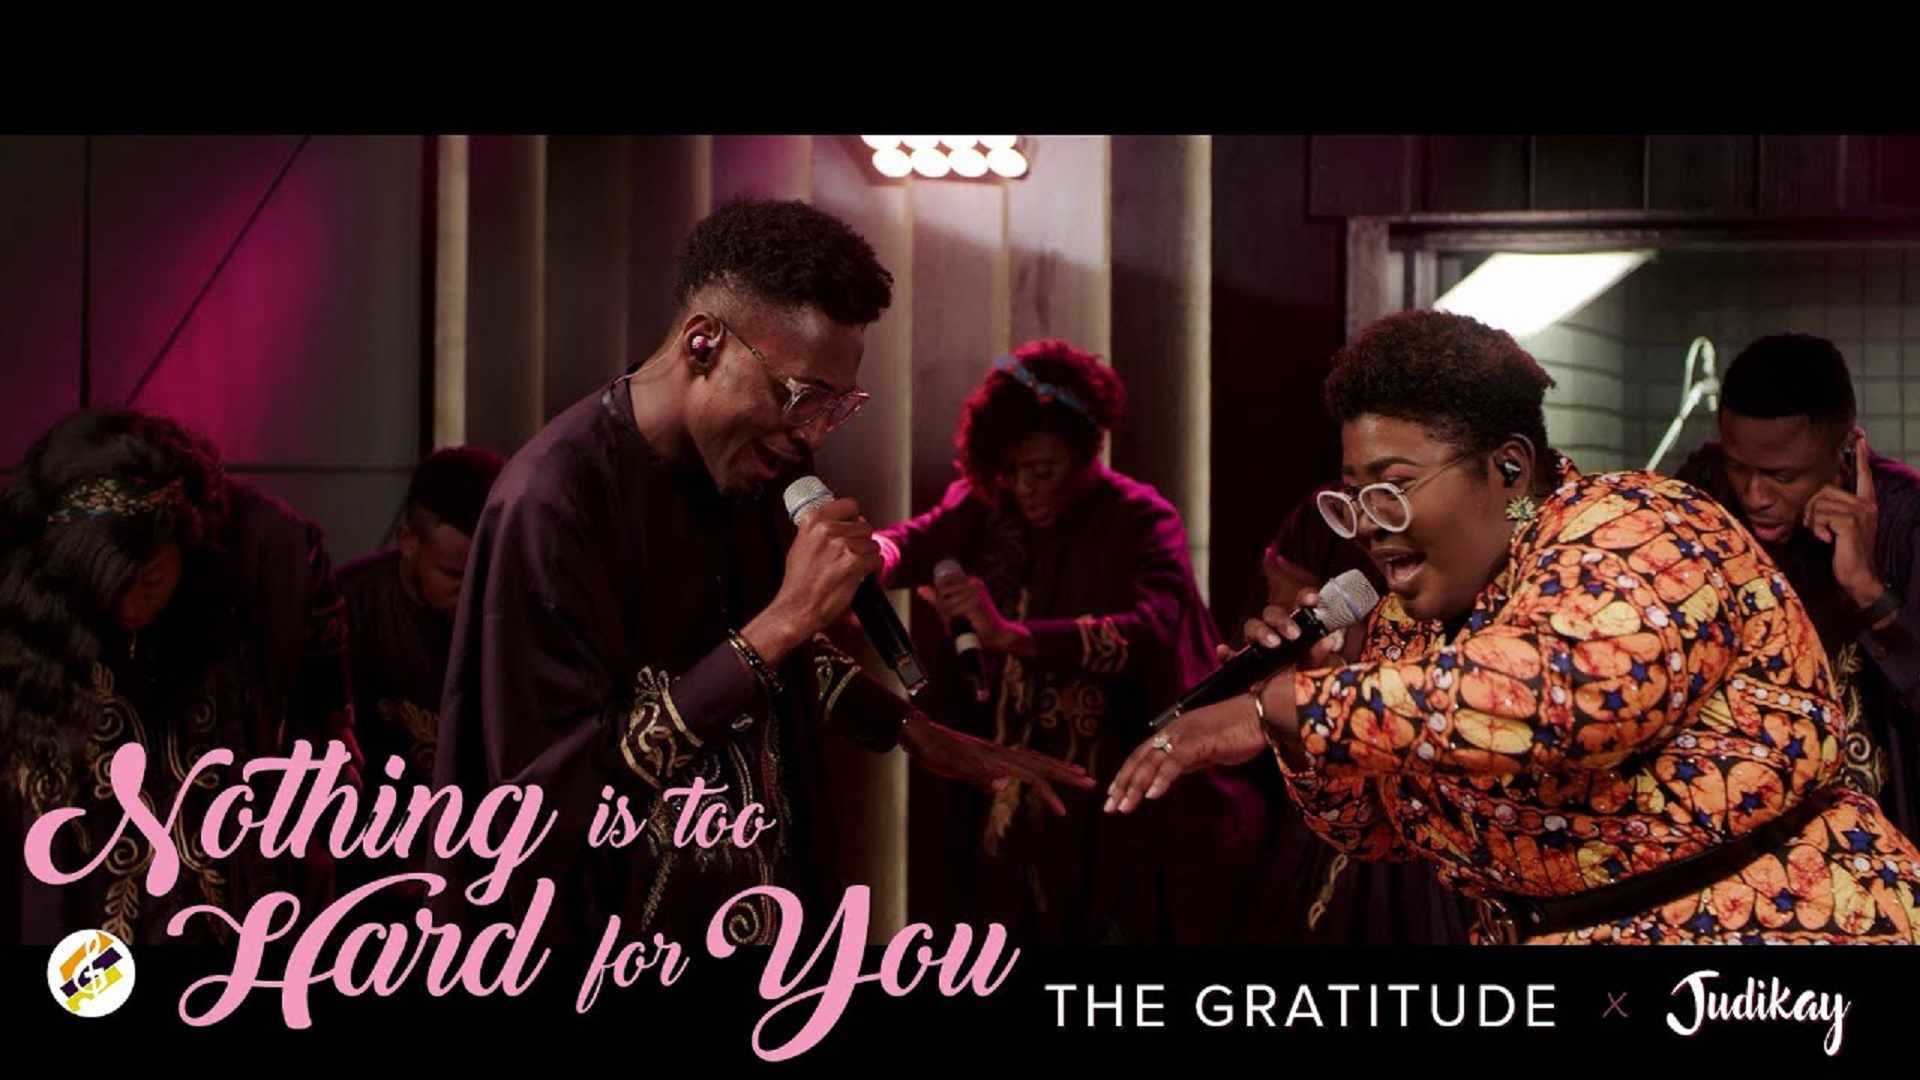 The Gratitude & Judikay Nothing Is Too Hard For You